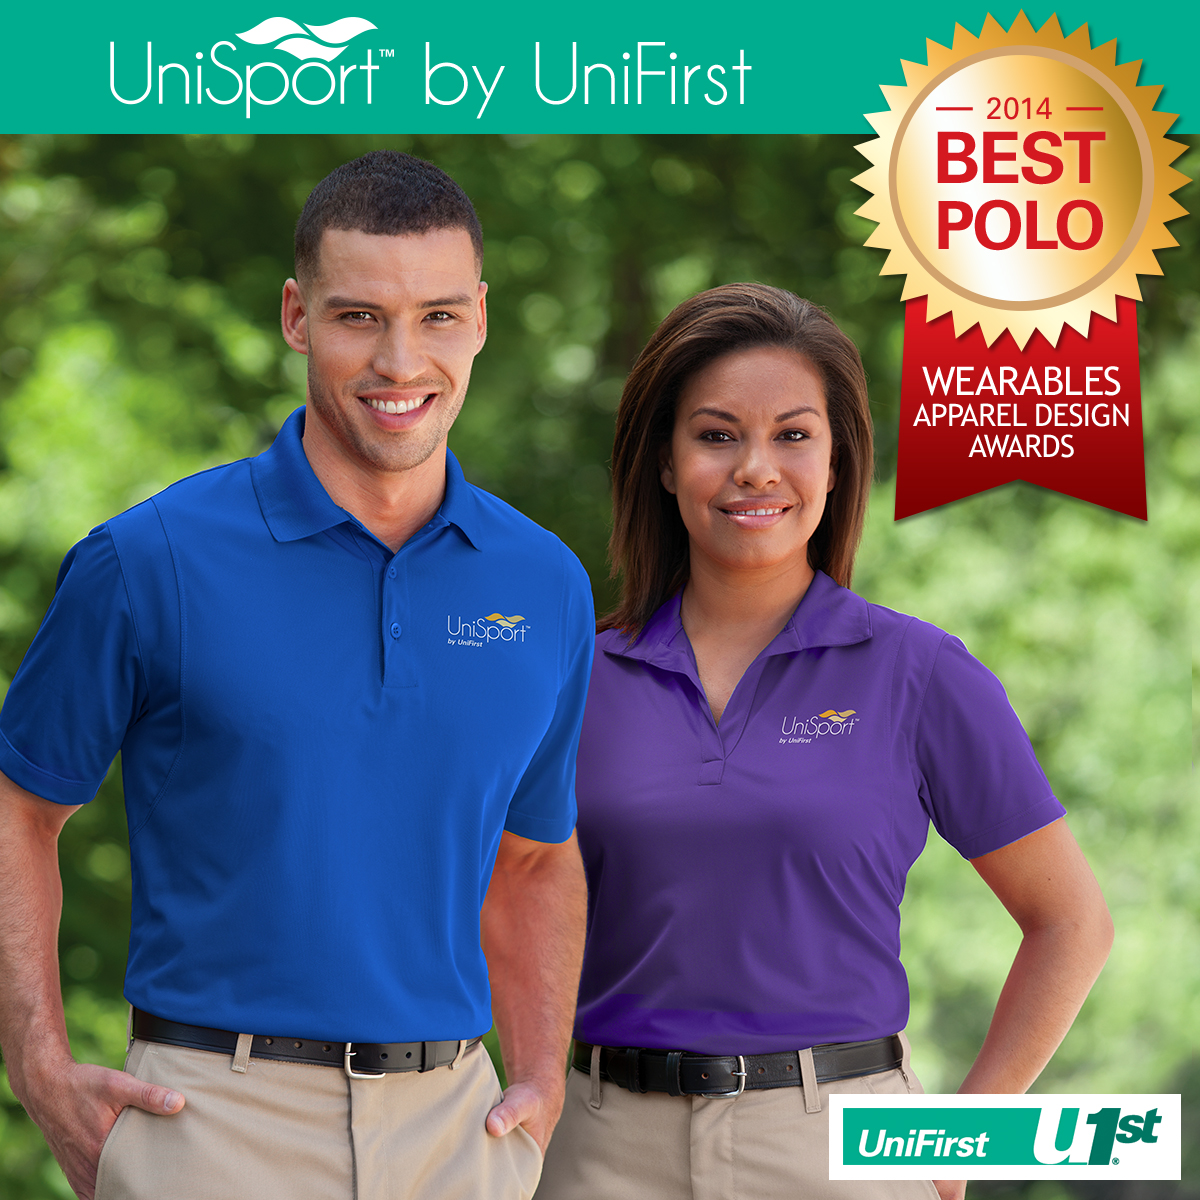 UniFirst in Apparel Design Awards With New